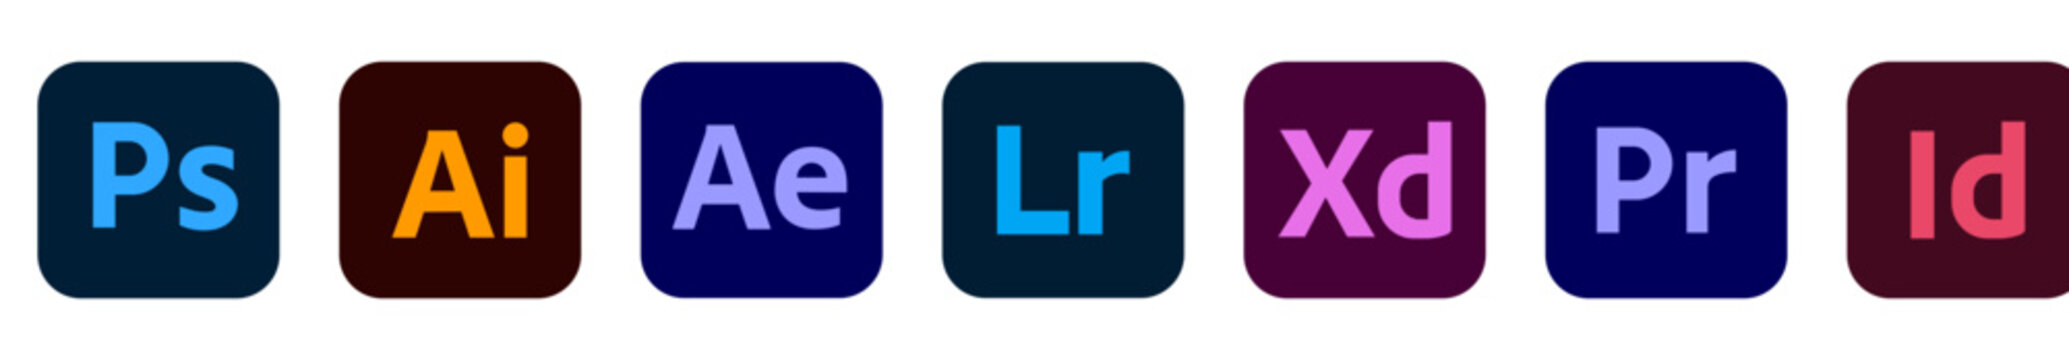 Adobe Products Icons. Photoshop, Illustrator, After Effects, Lightroom, Experience Design, Adobe Premiere Pro InDesign Animate